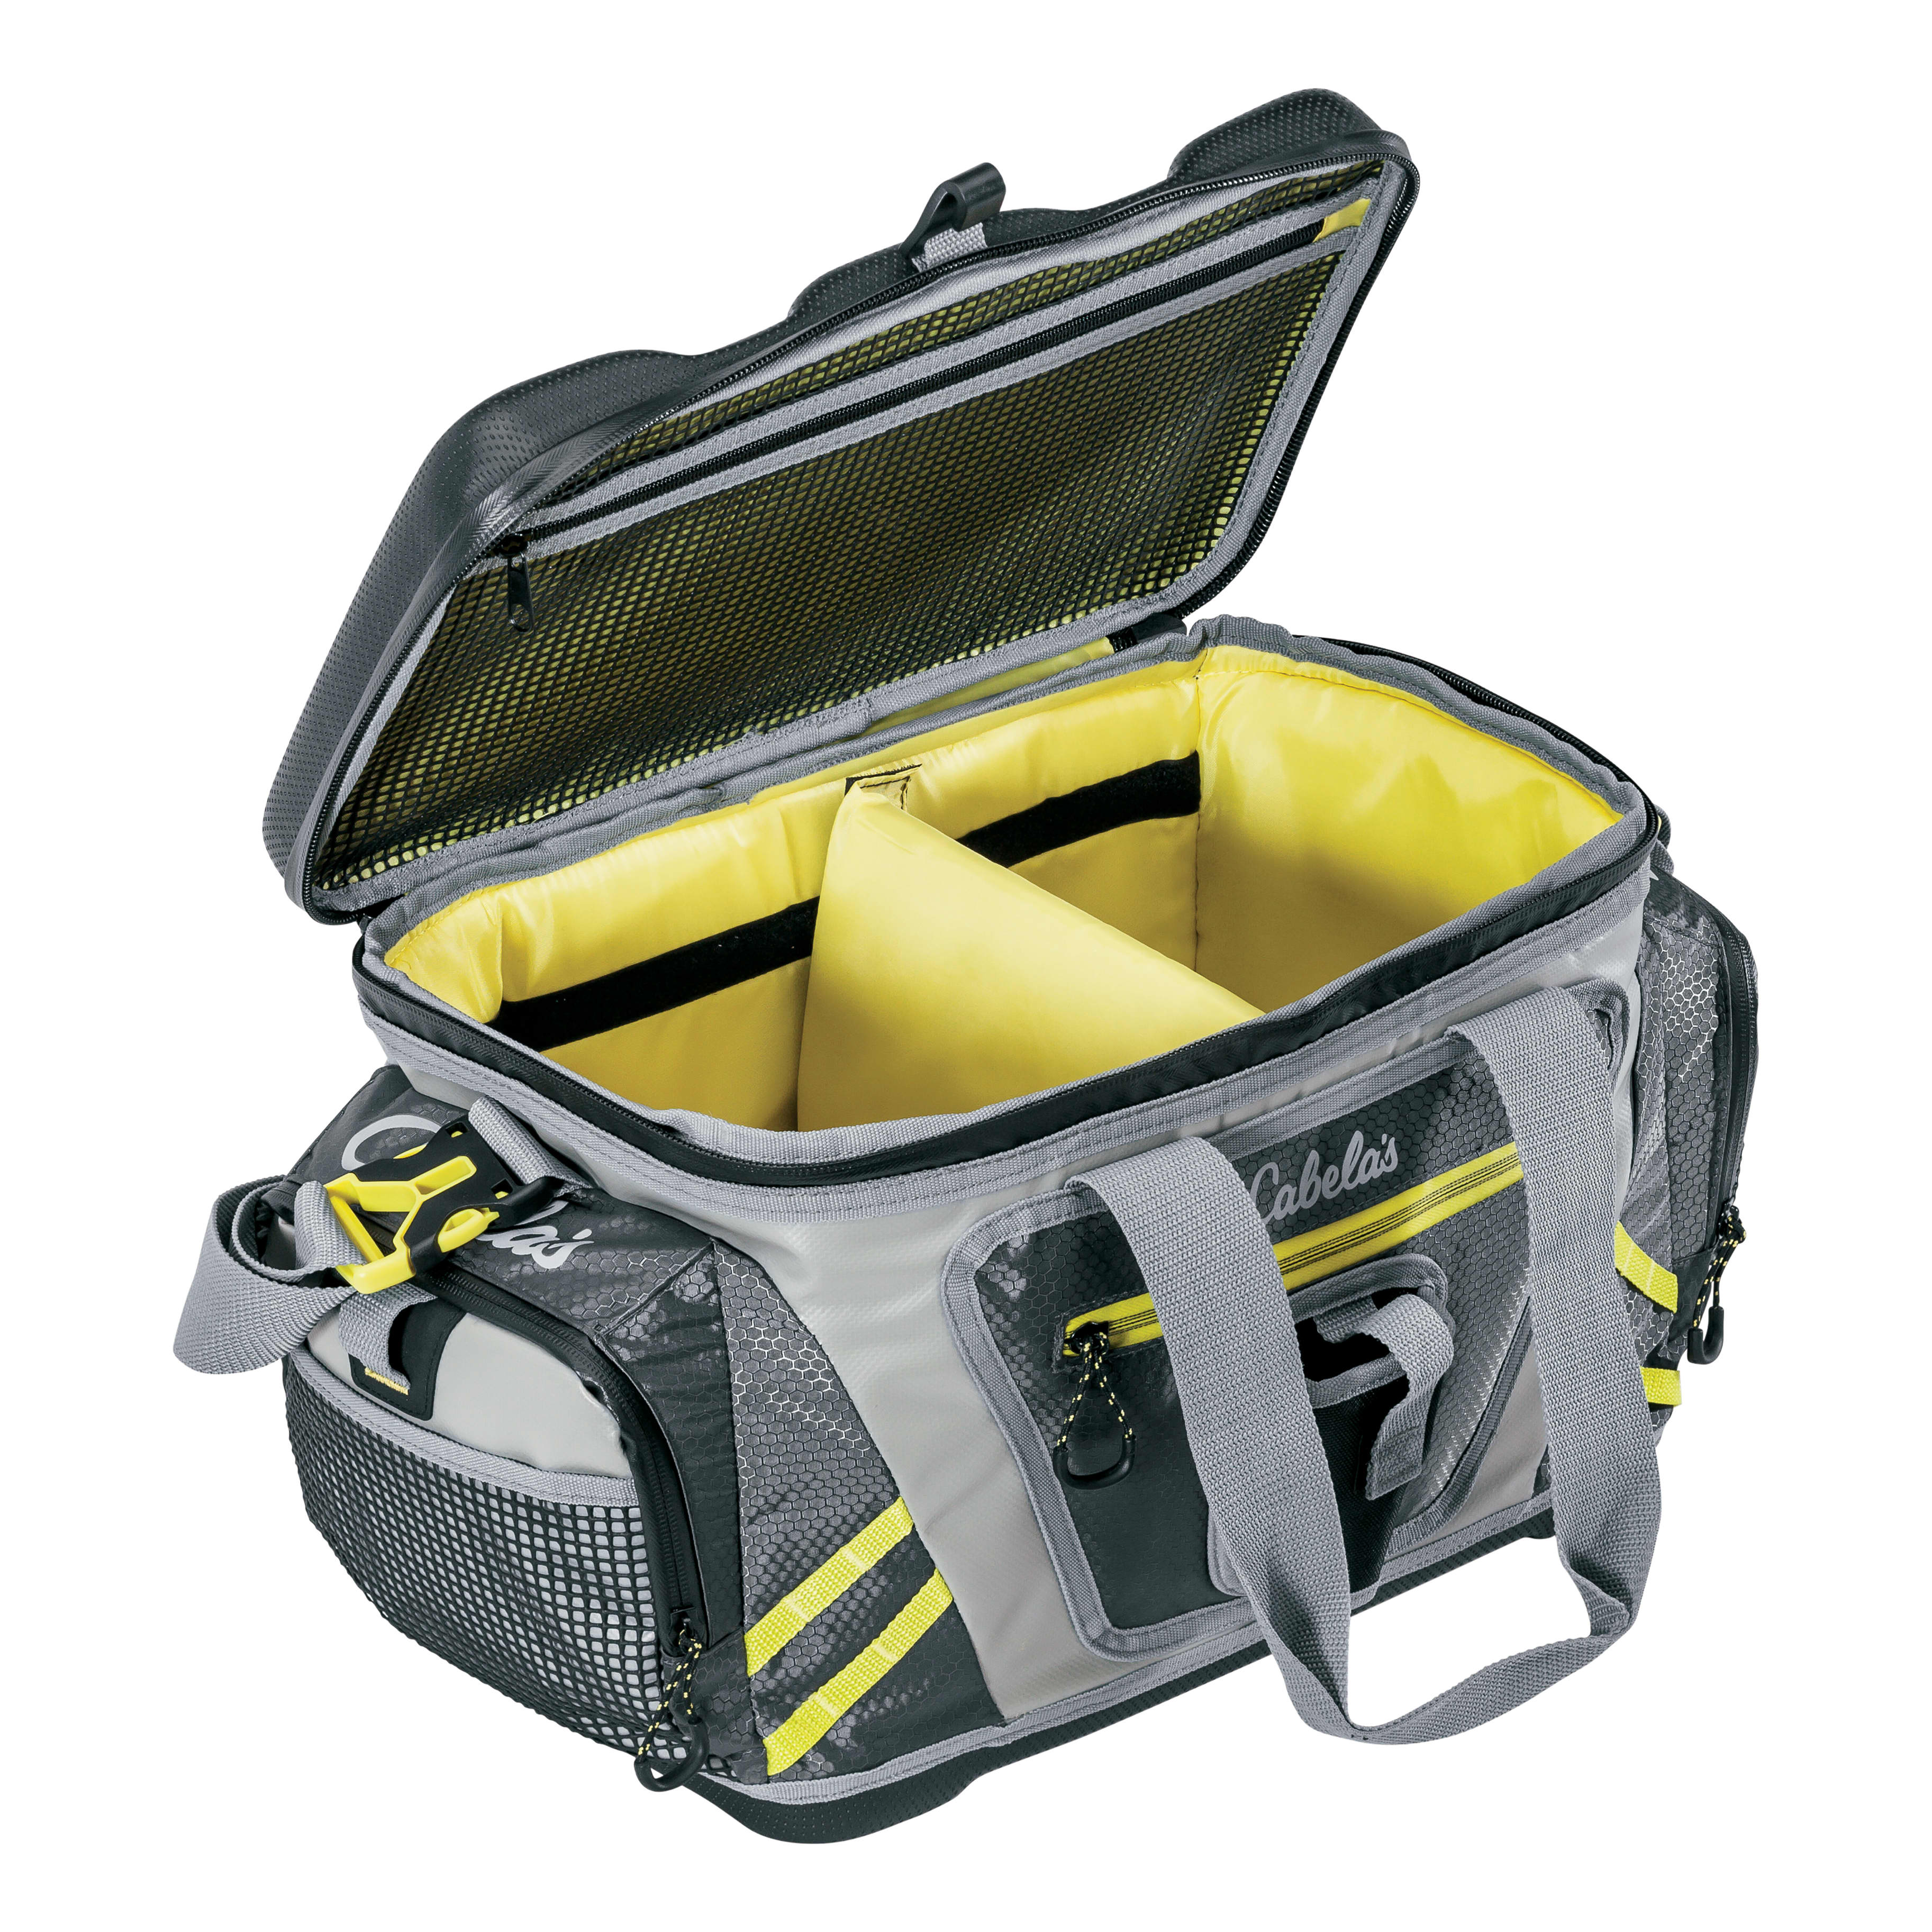 Cabela's Marine-Grade Tackle Bag with Utility Box - Open View